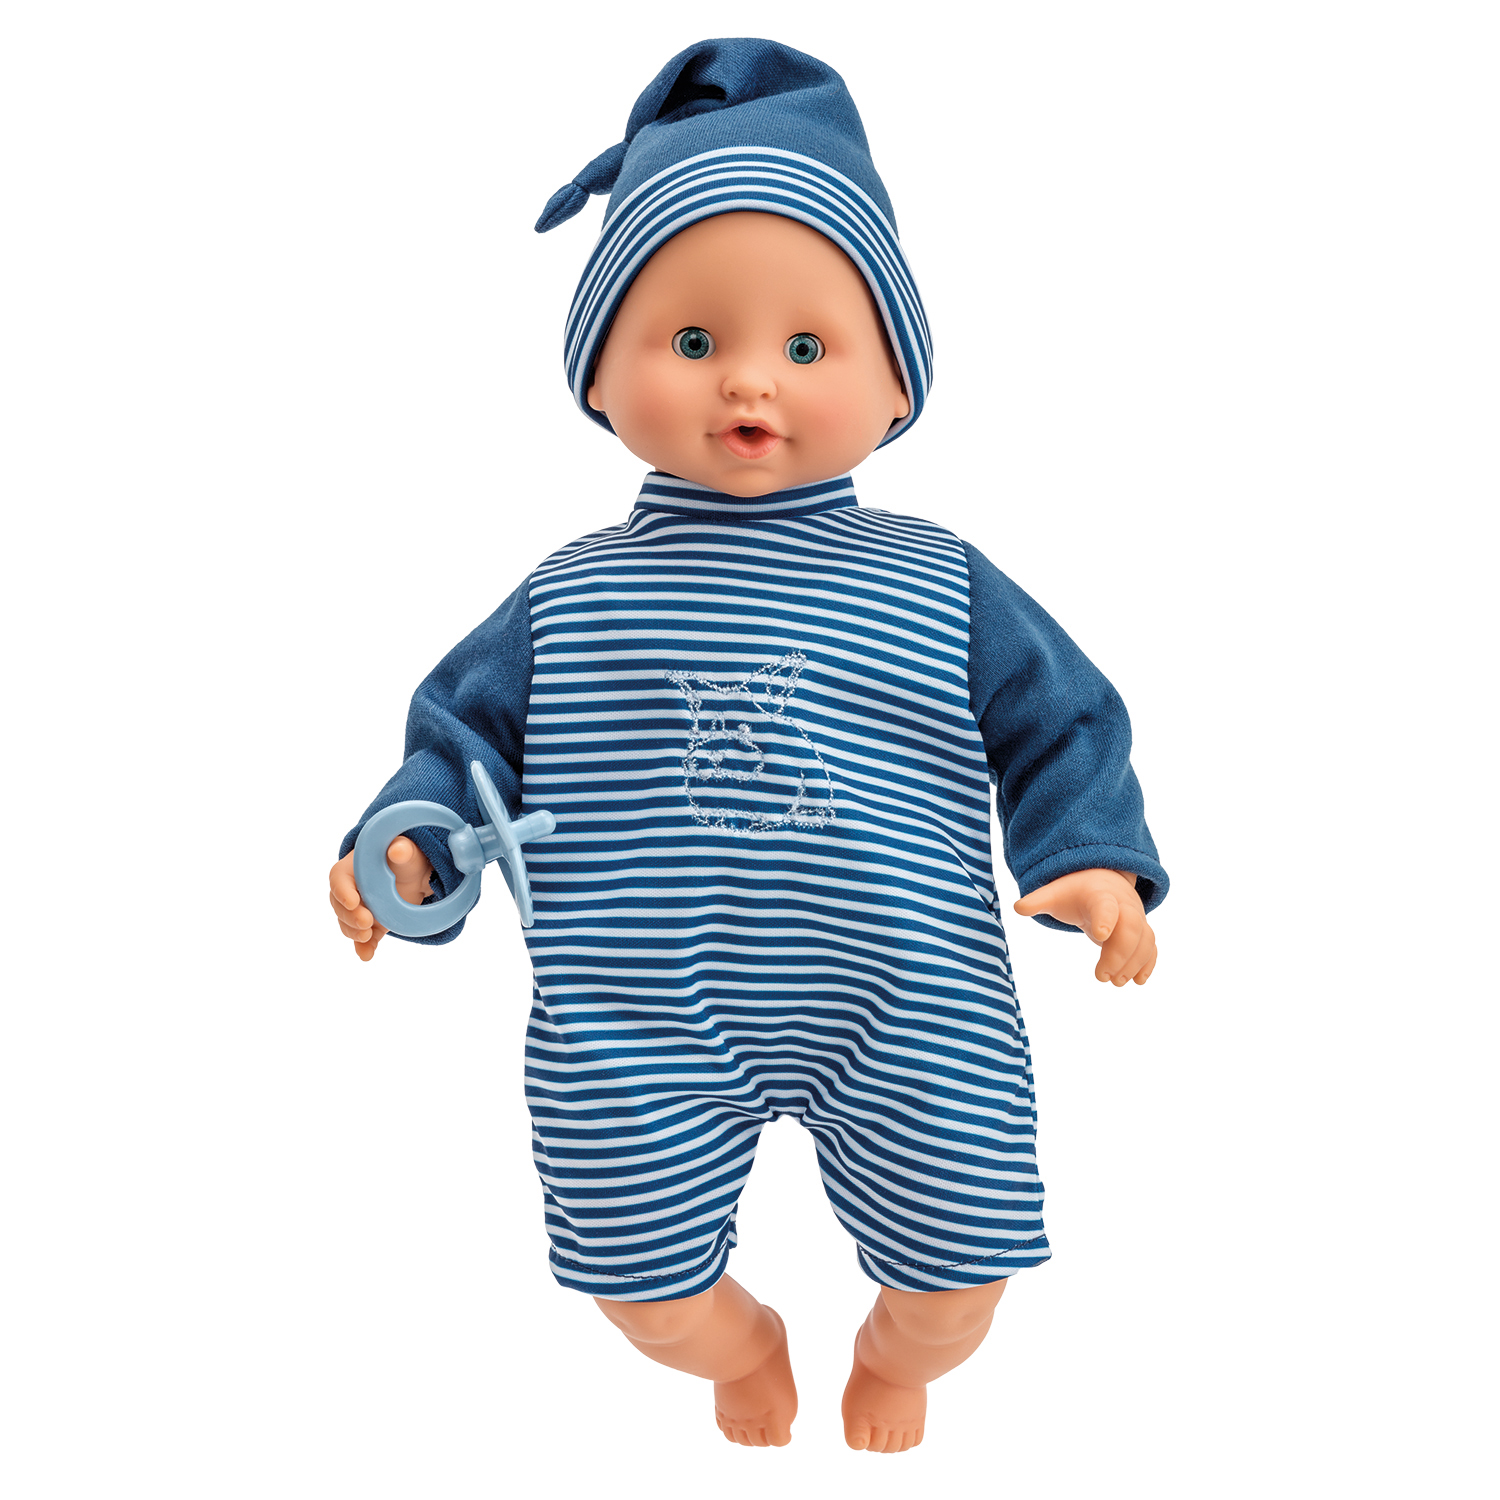 Baby dolls baby doll olle